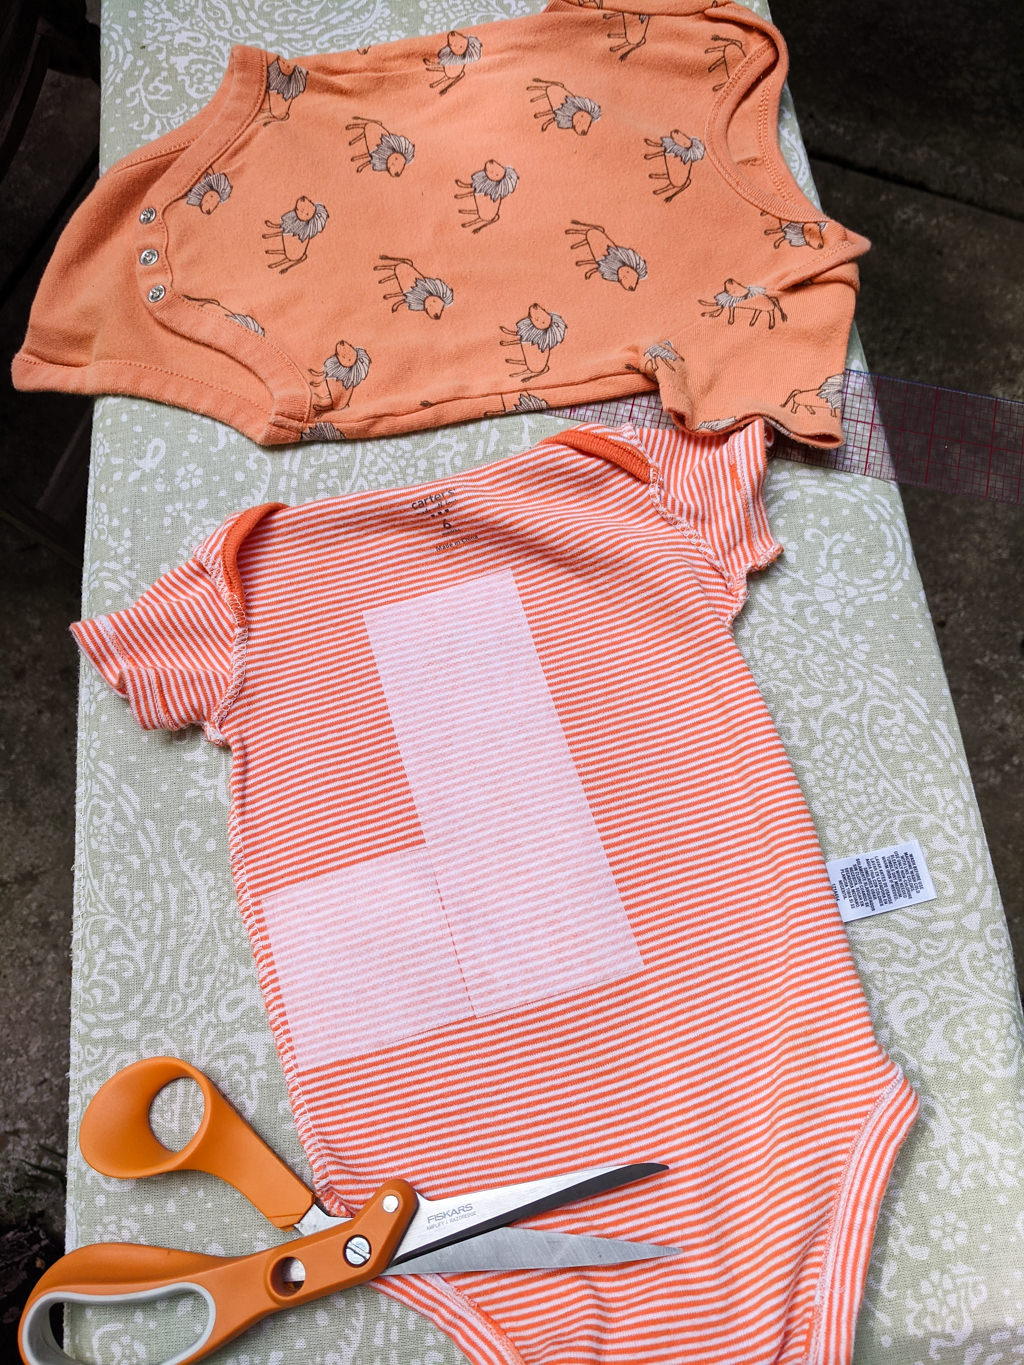 Making a baby clothes quilt